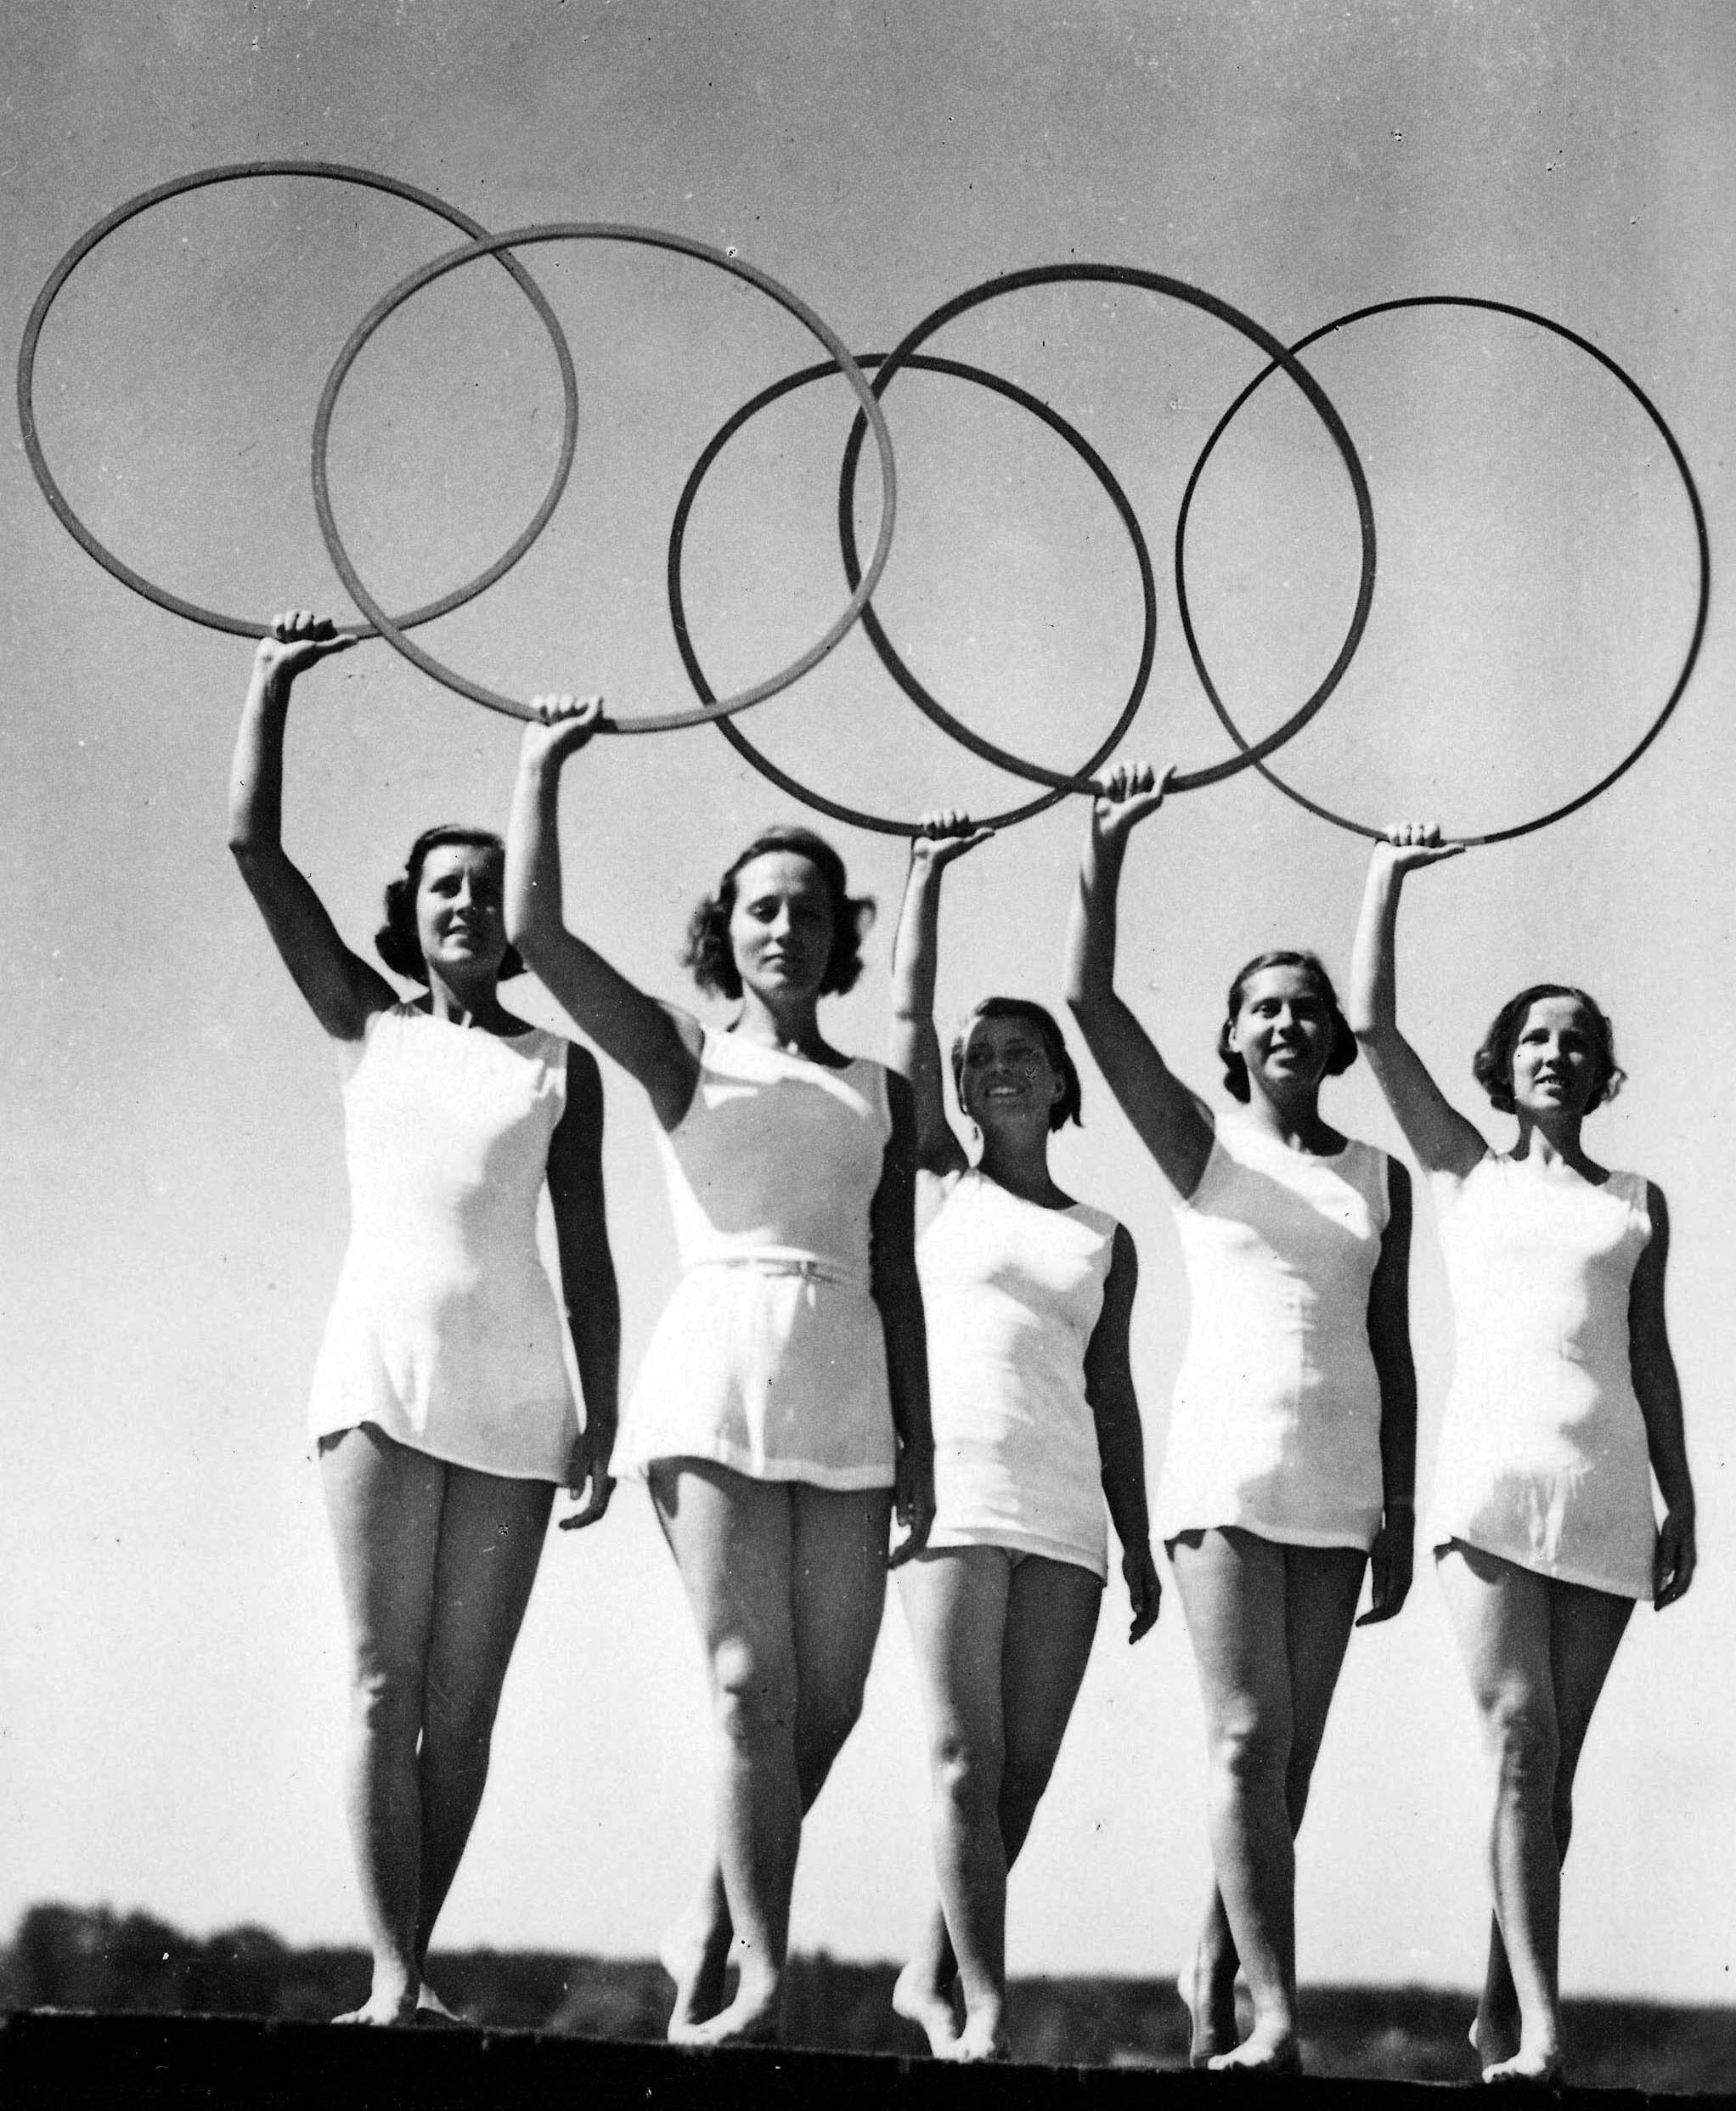 1936 Olympic Games, Berlin, Germany. Five young women take part in a display of the Olympic Rings.